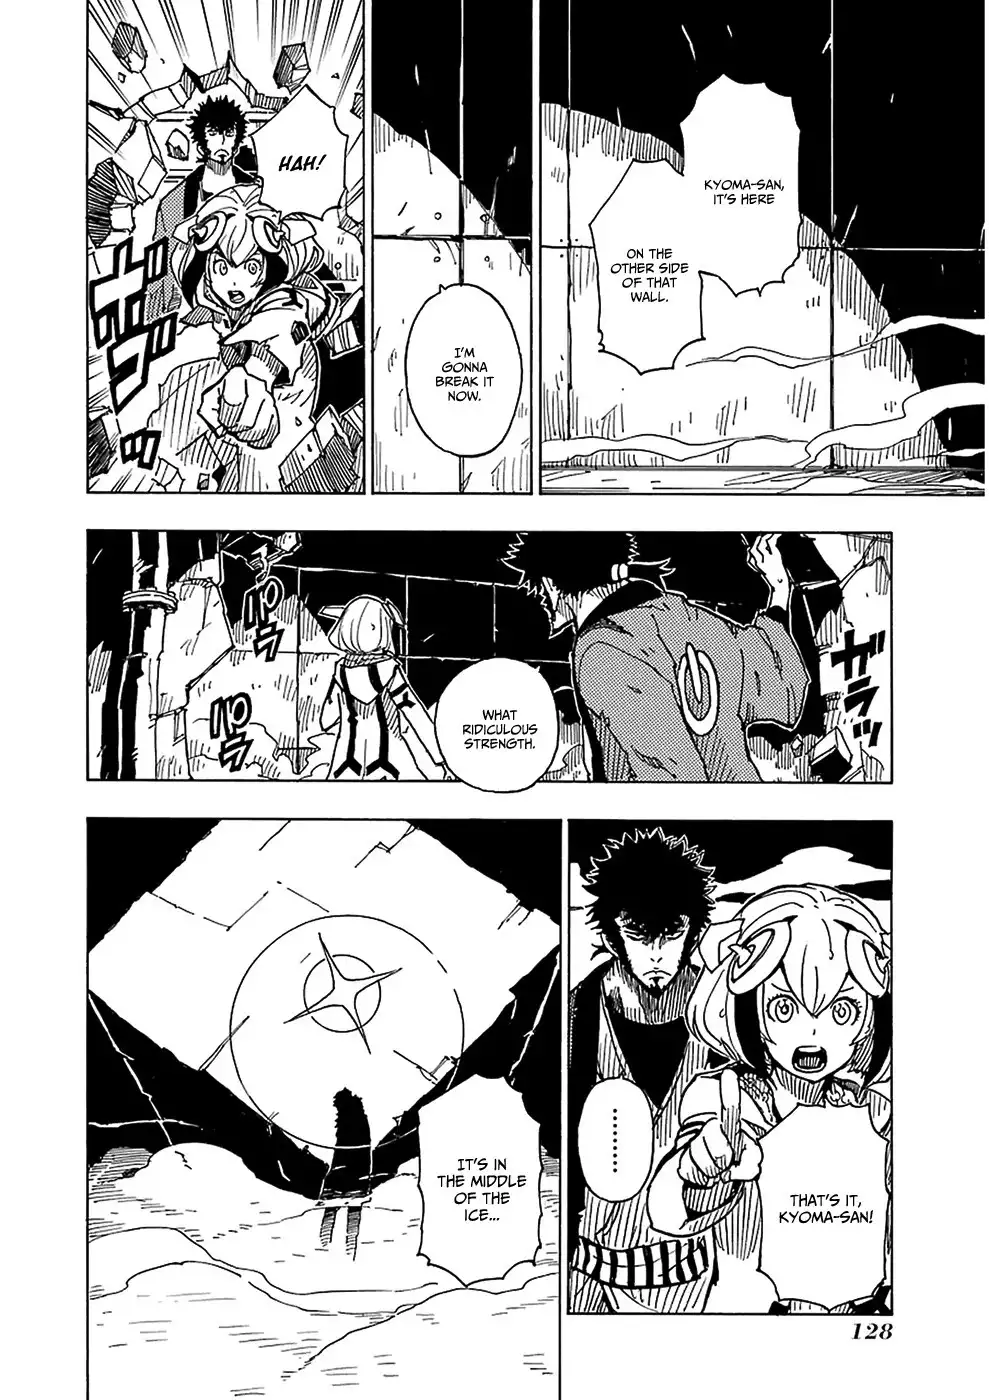 Dimension W Chapter 28